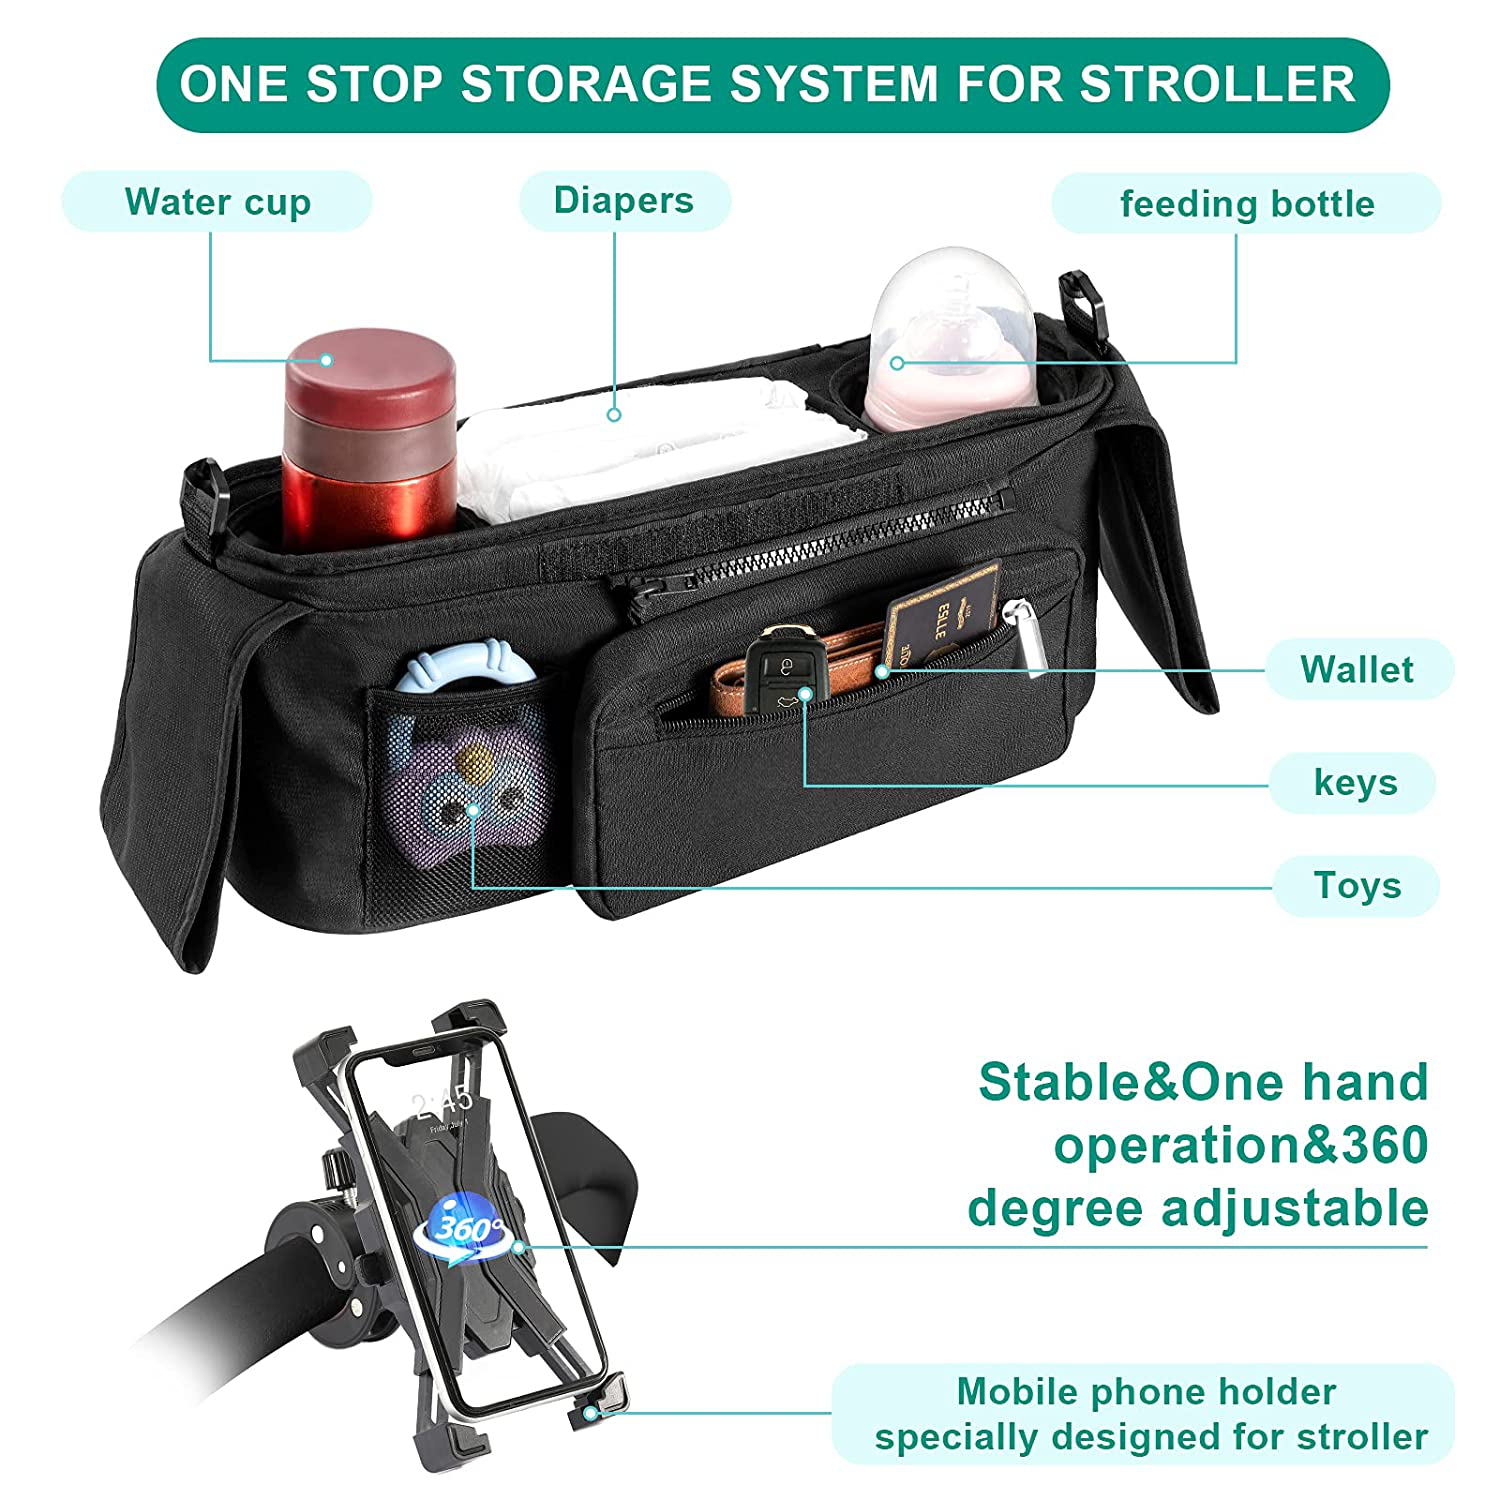 Universal Stroller Organizer Accessories with Insulated Stroller Cup Holder,Phone Holder for Stroller,Fits for Stroller like Uppababy, Baby Jogger, Britax, Bugaboo, BOB, Umbrella and Pet Stroller Animals & Pet Supplies > Pet Supplies > Dog Supplies > Dog Treadmills MOTEM   